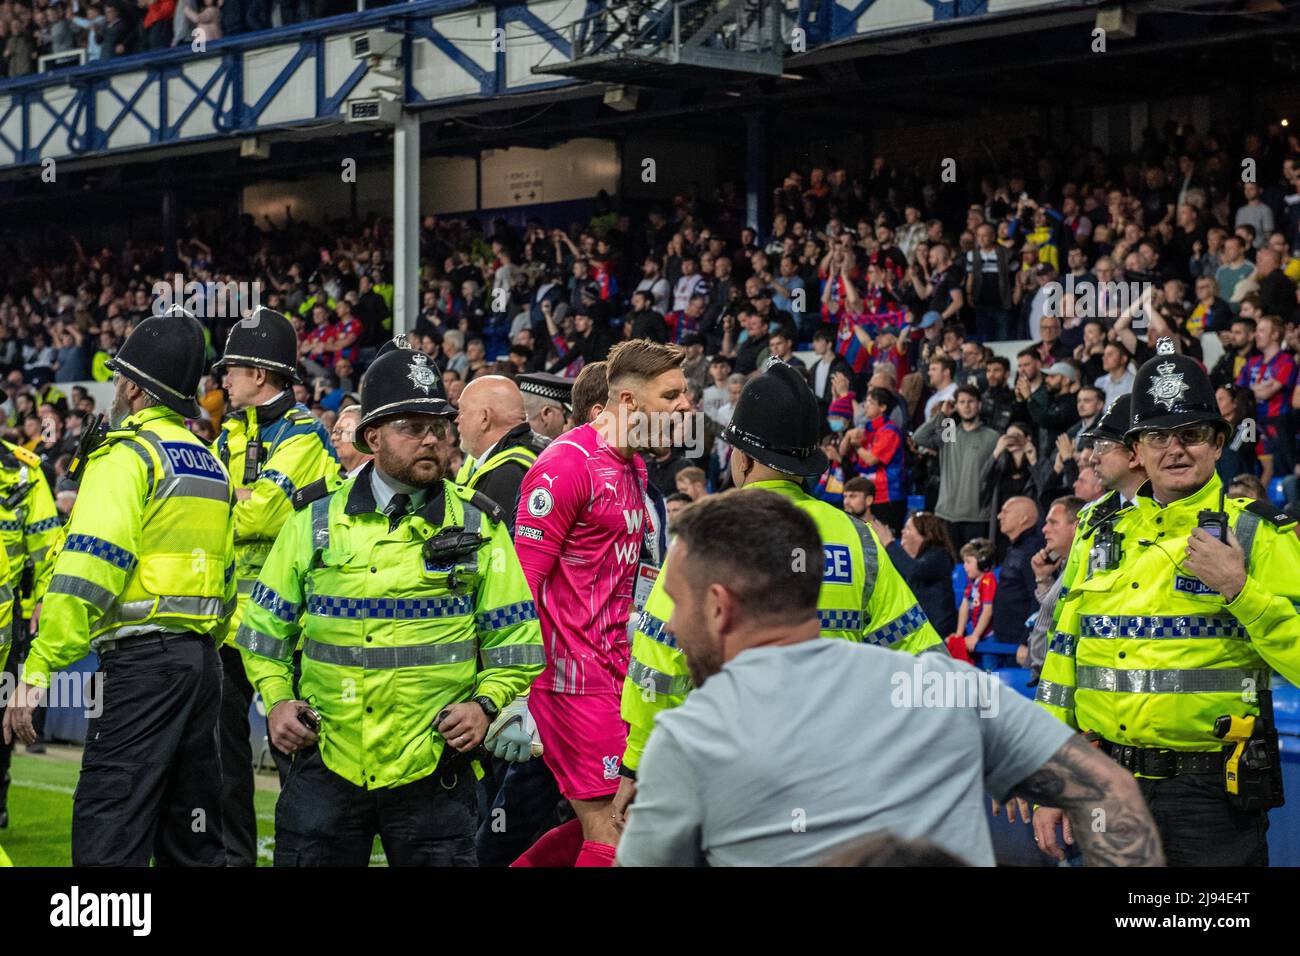 LIVERPOOL, ENGLAND - MAY 19: Jack Butland, Police and Everton fans run on pitch during the Premier League match between Everton and Crystal Palace at Goodison Park on May 19, 2022 in Liverpool, United Kingdom. (Photo by Sebastian Frej) Stock Photo